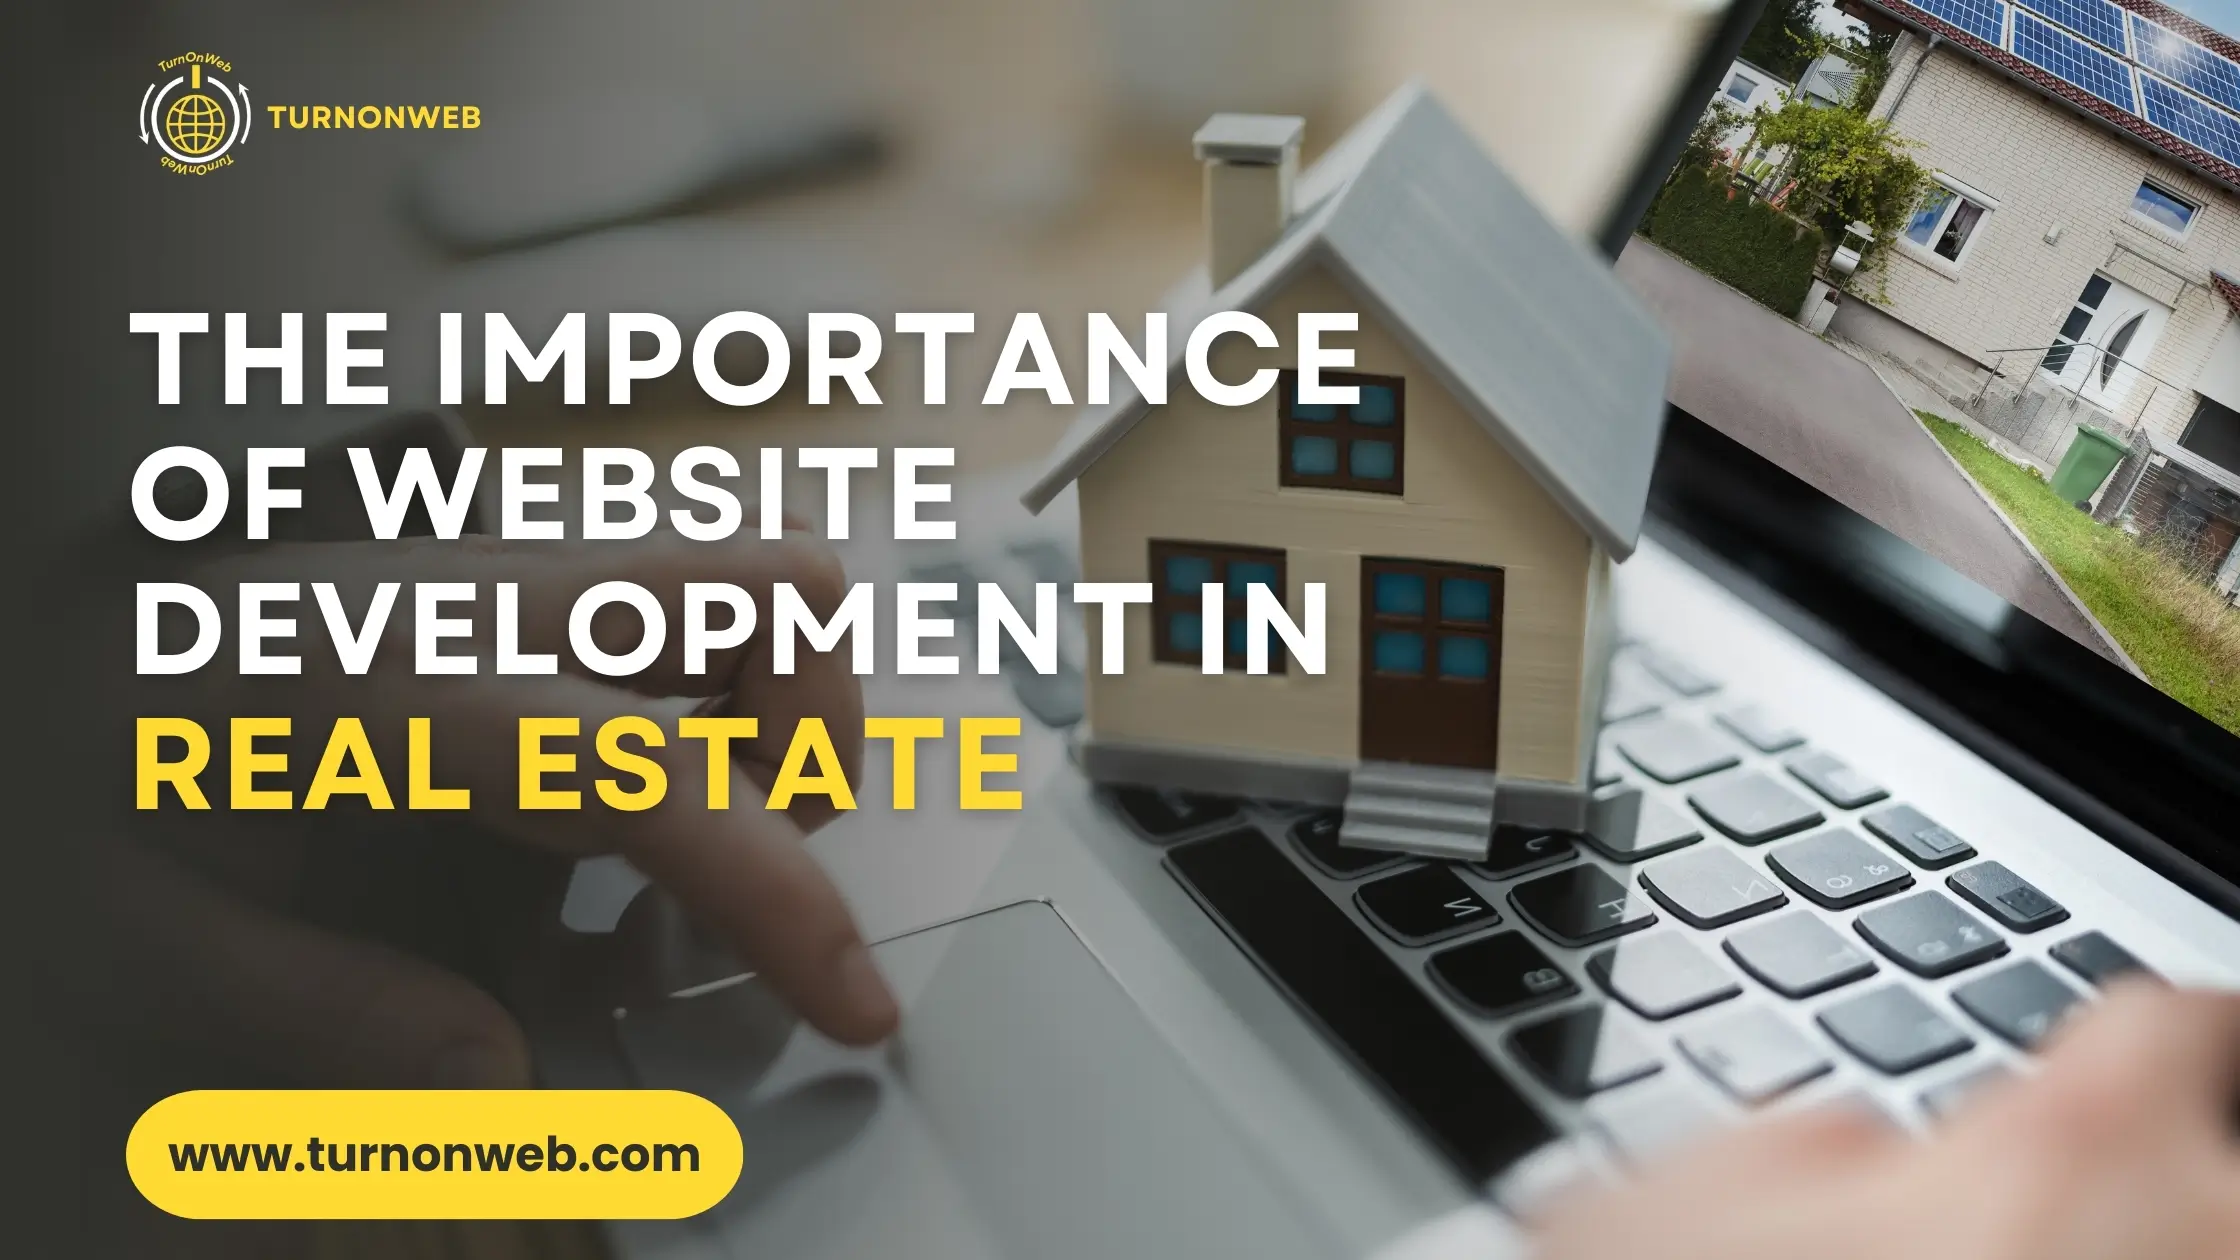 The Importance of Website Development in Real Estate